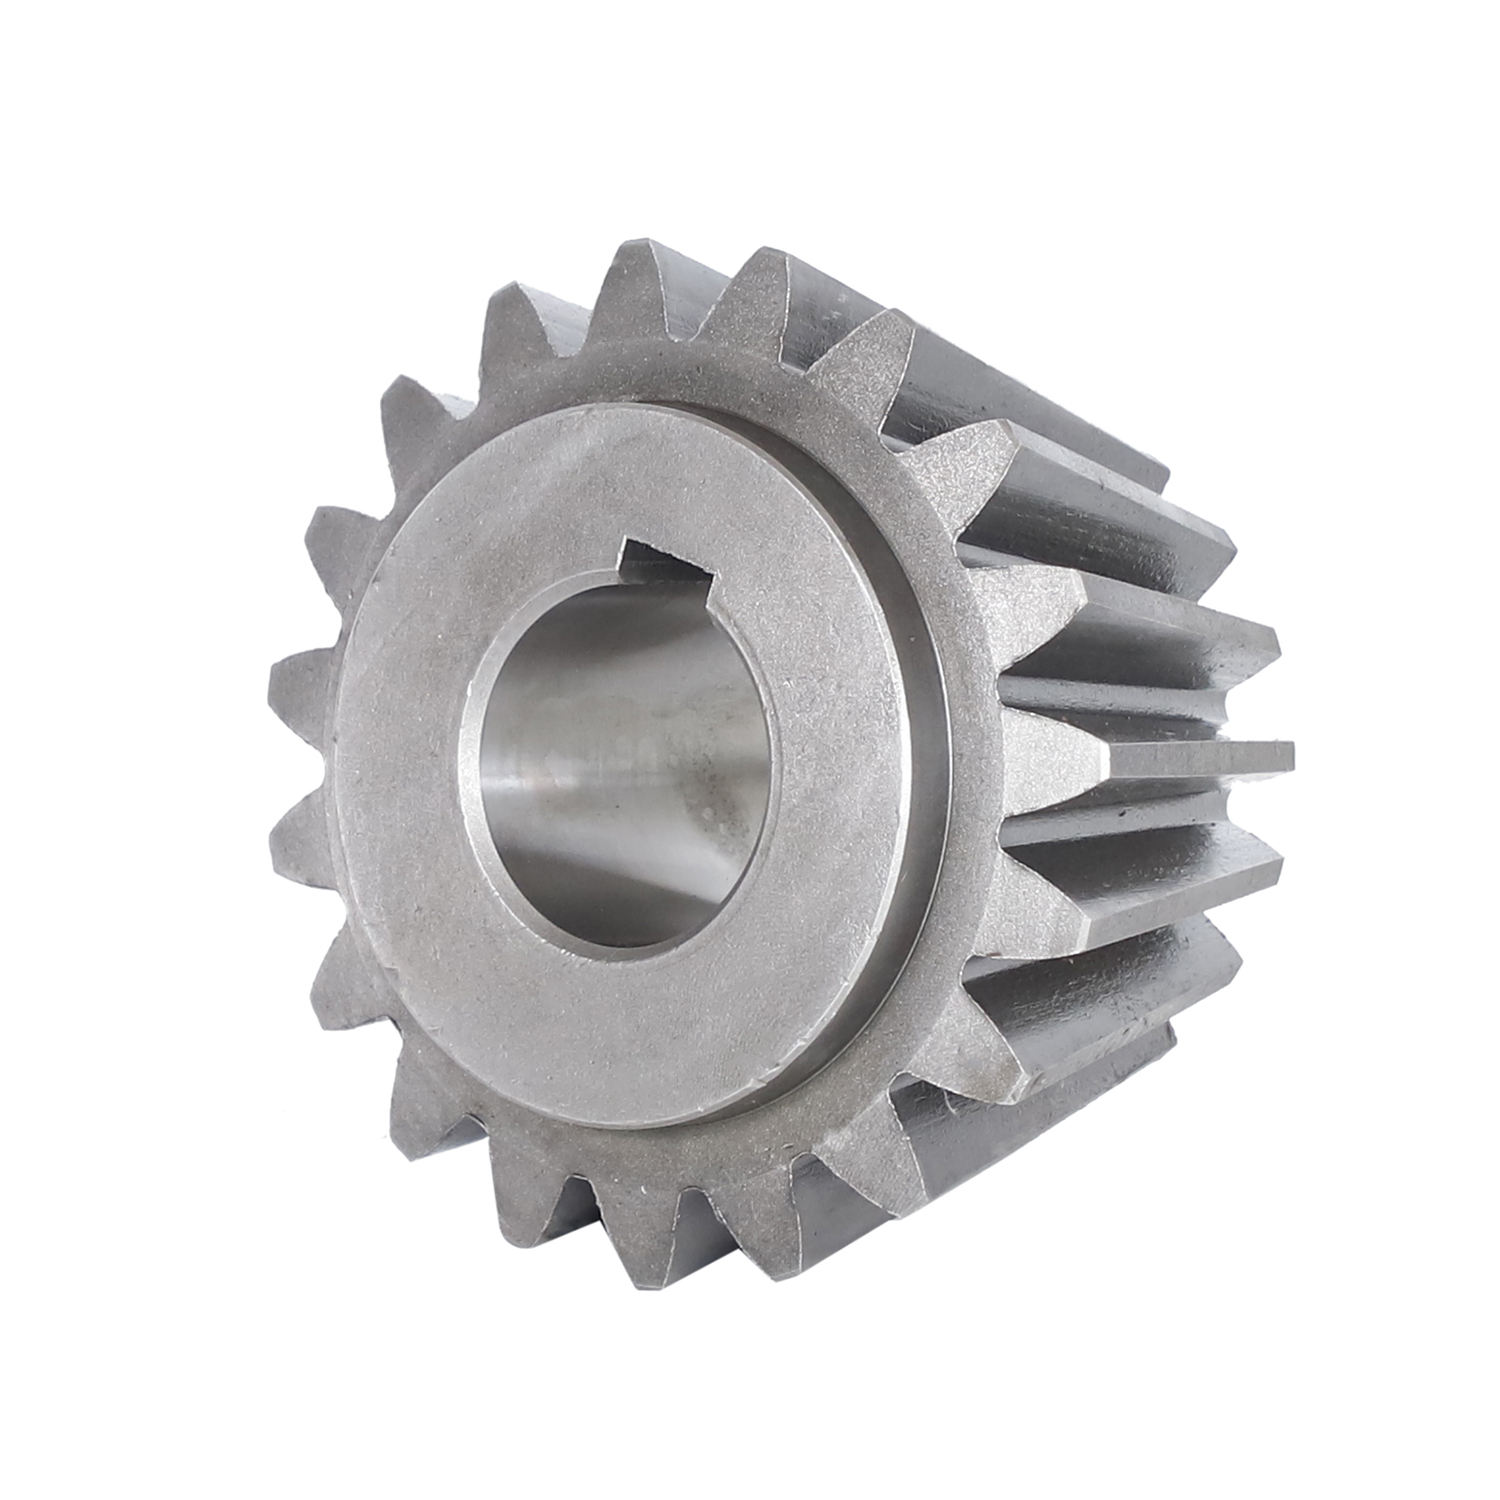 6yl-95100 cake outlet head bearing shell 70 bear short spindle screw oil press shaft spare parts